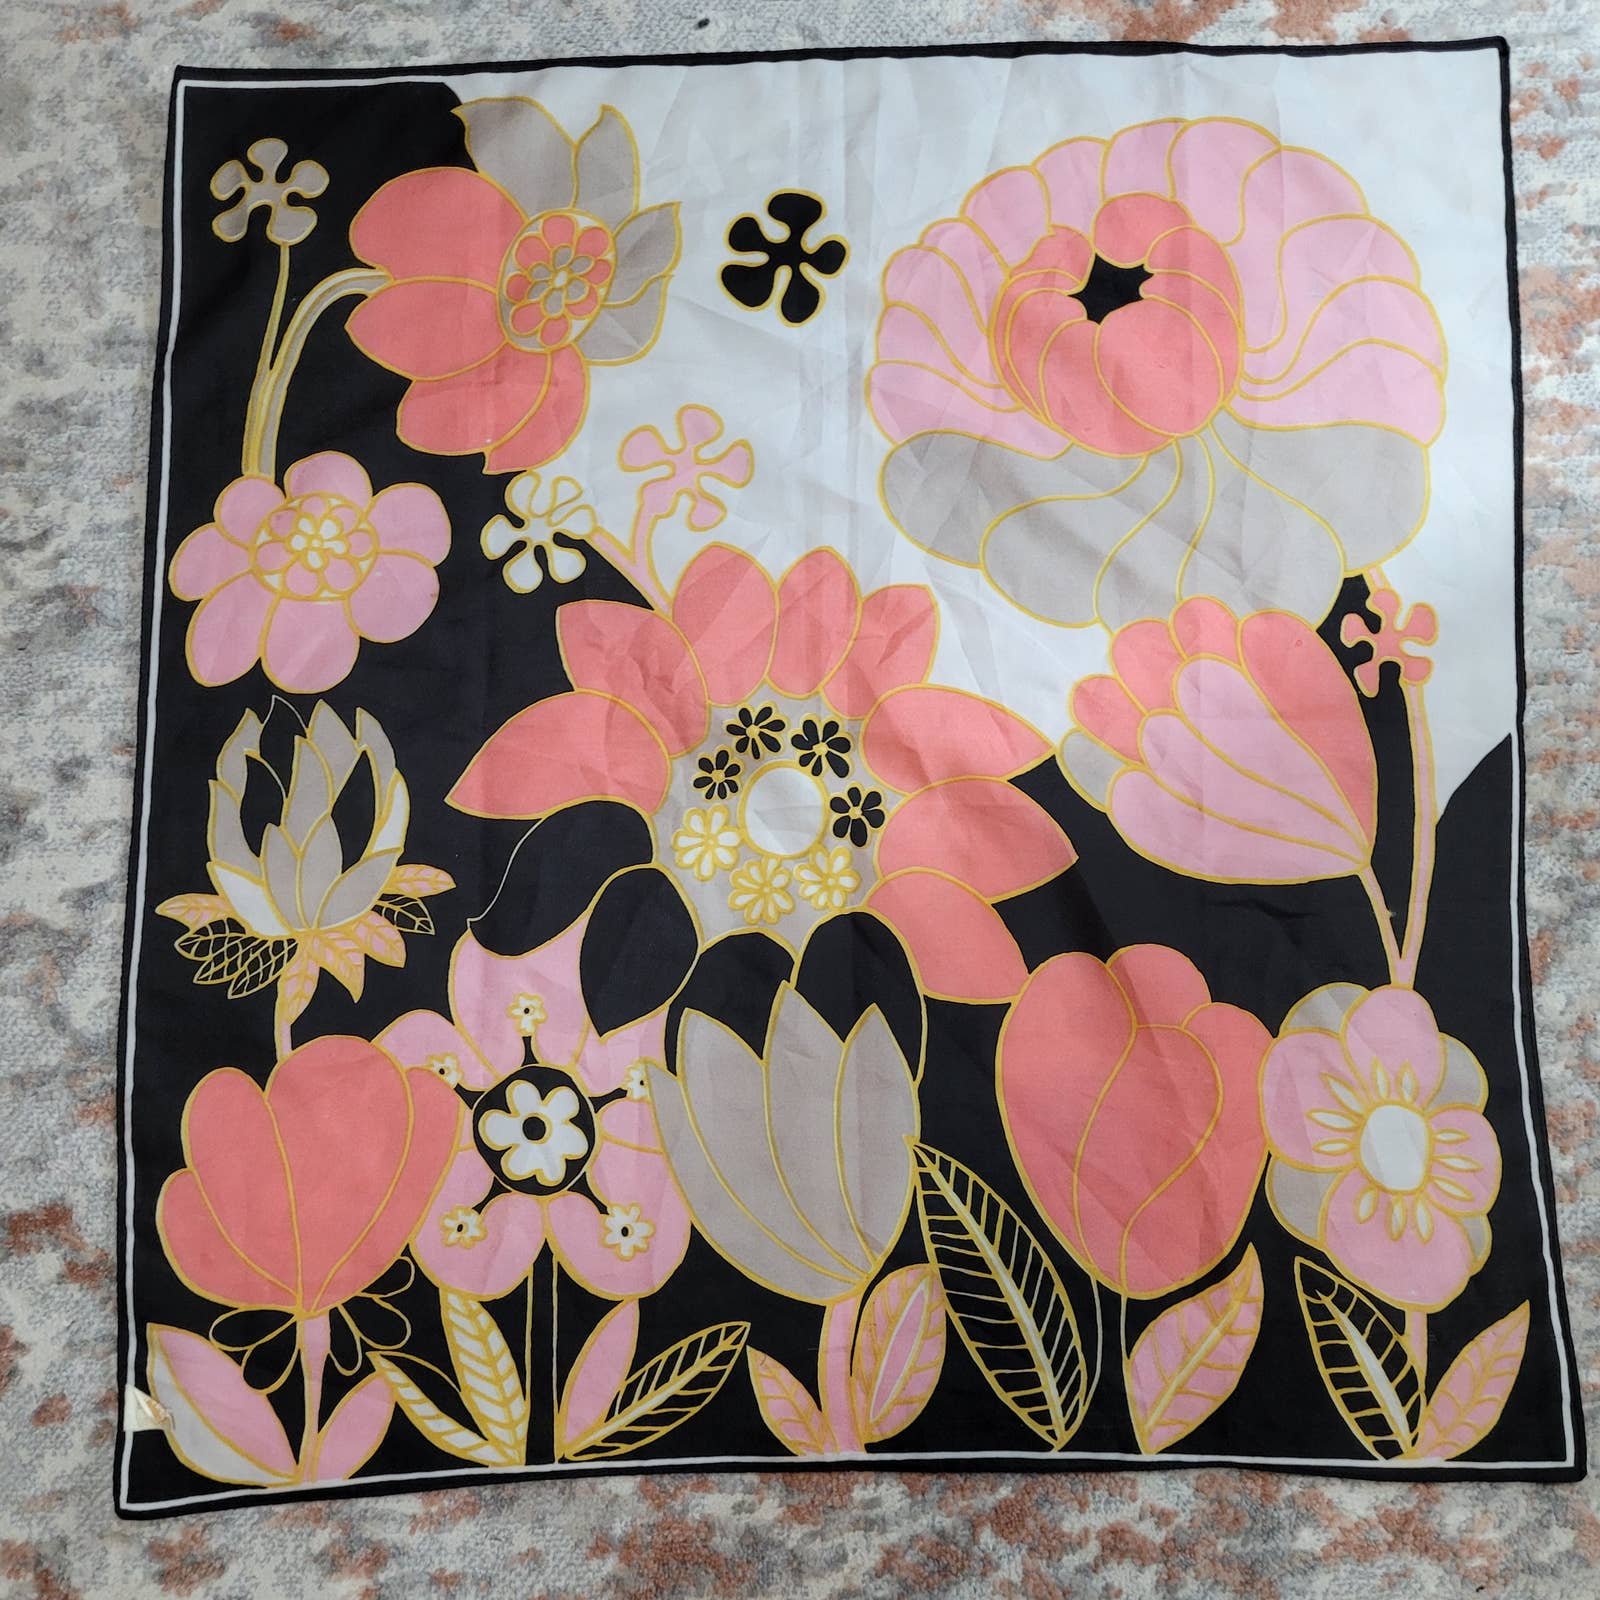 Vintage 1970s Square Scarf with Pink and Black Floral DesignMarkita's ClosetVintage